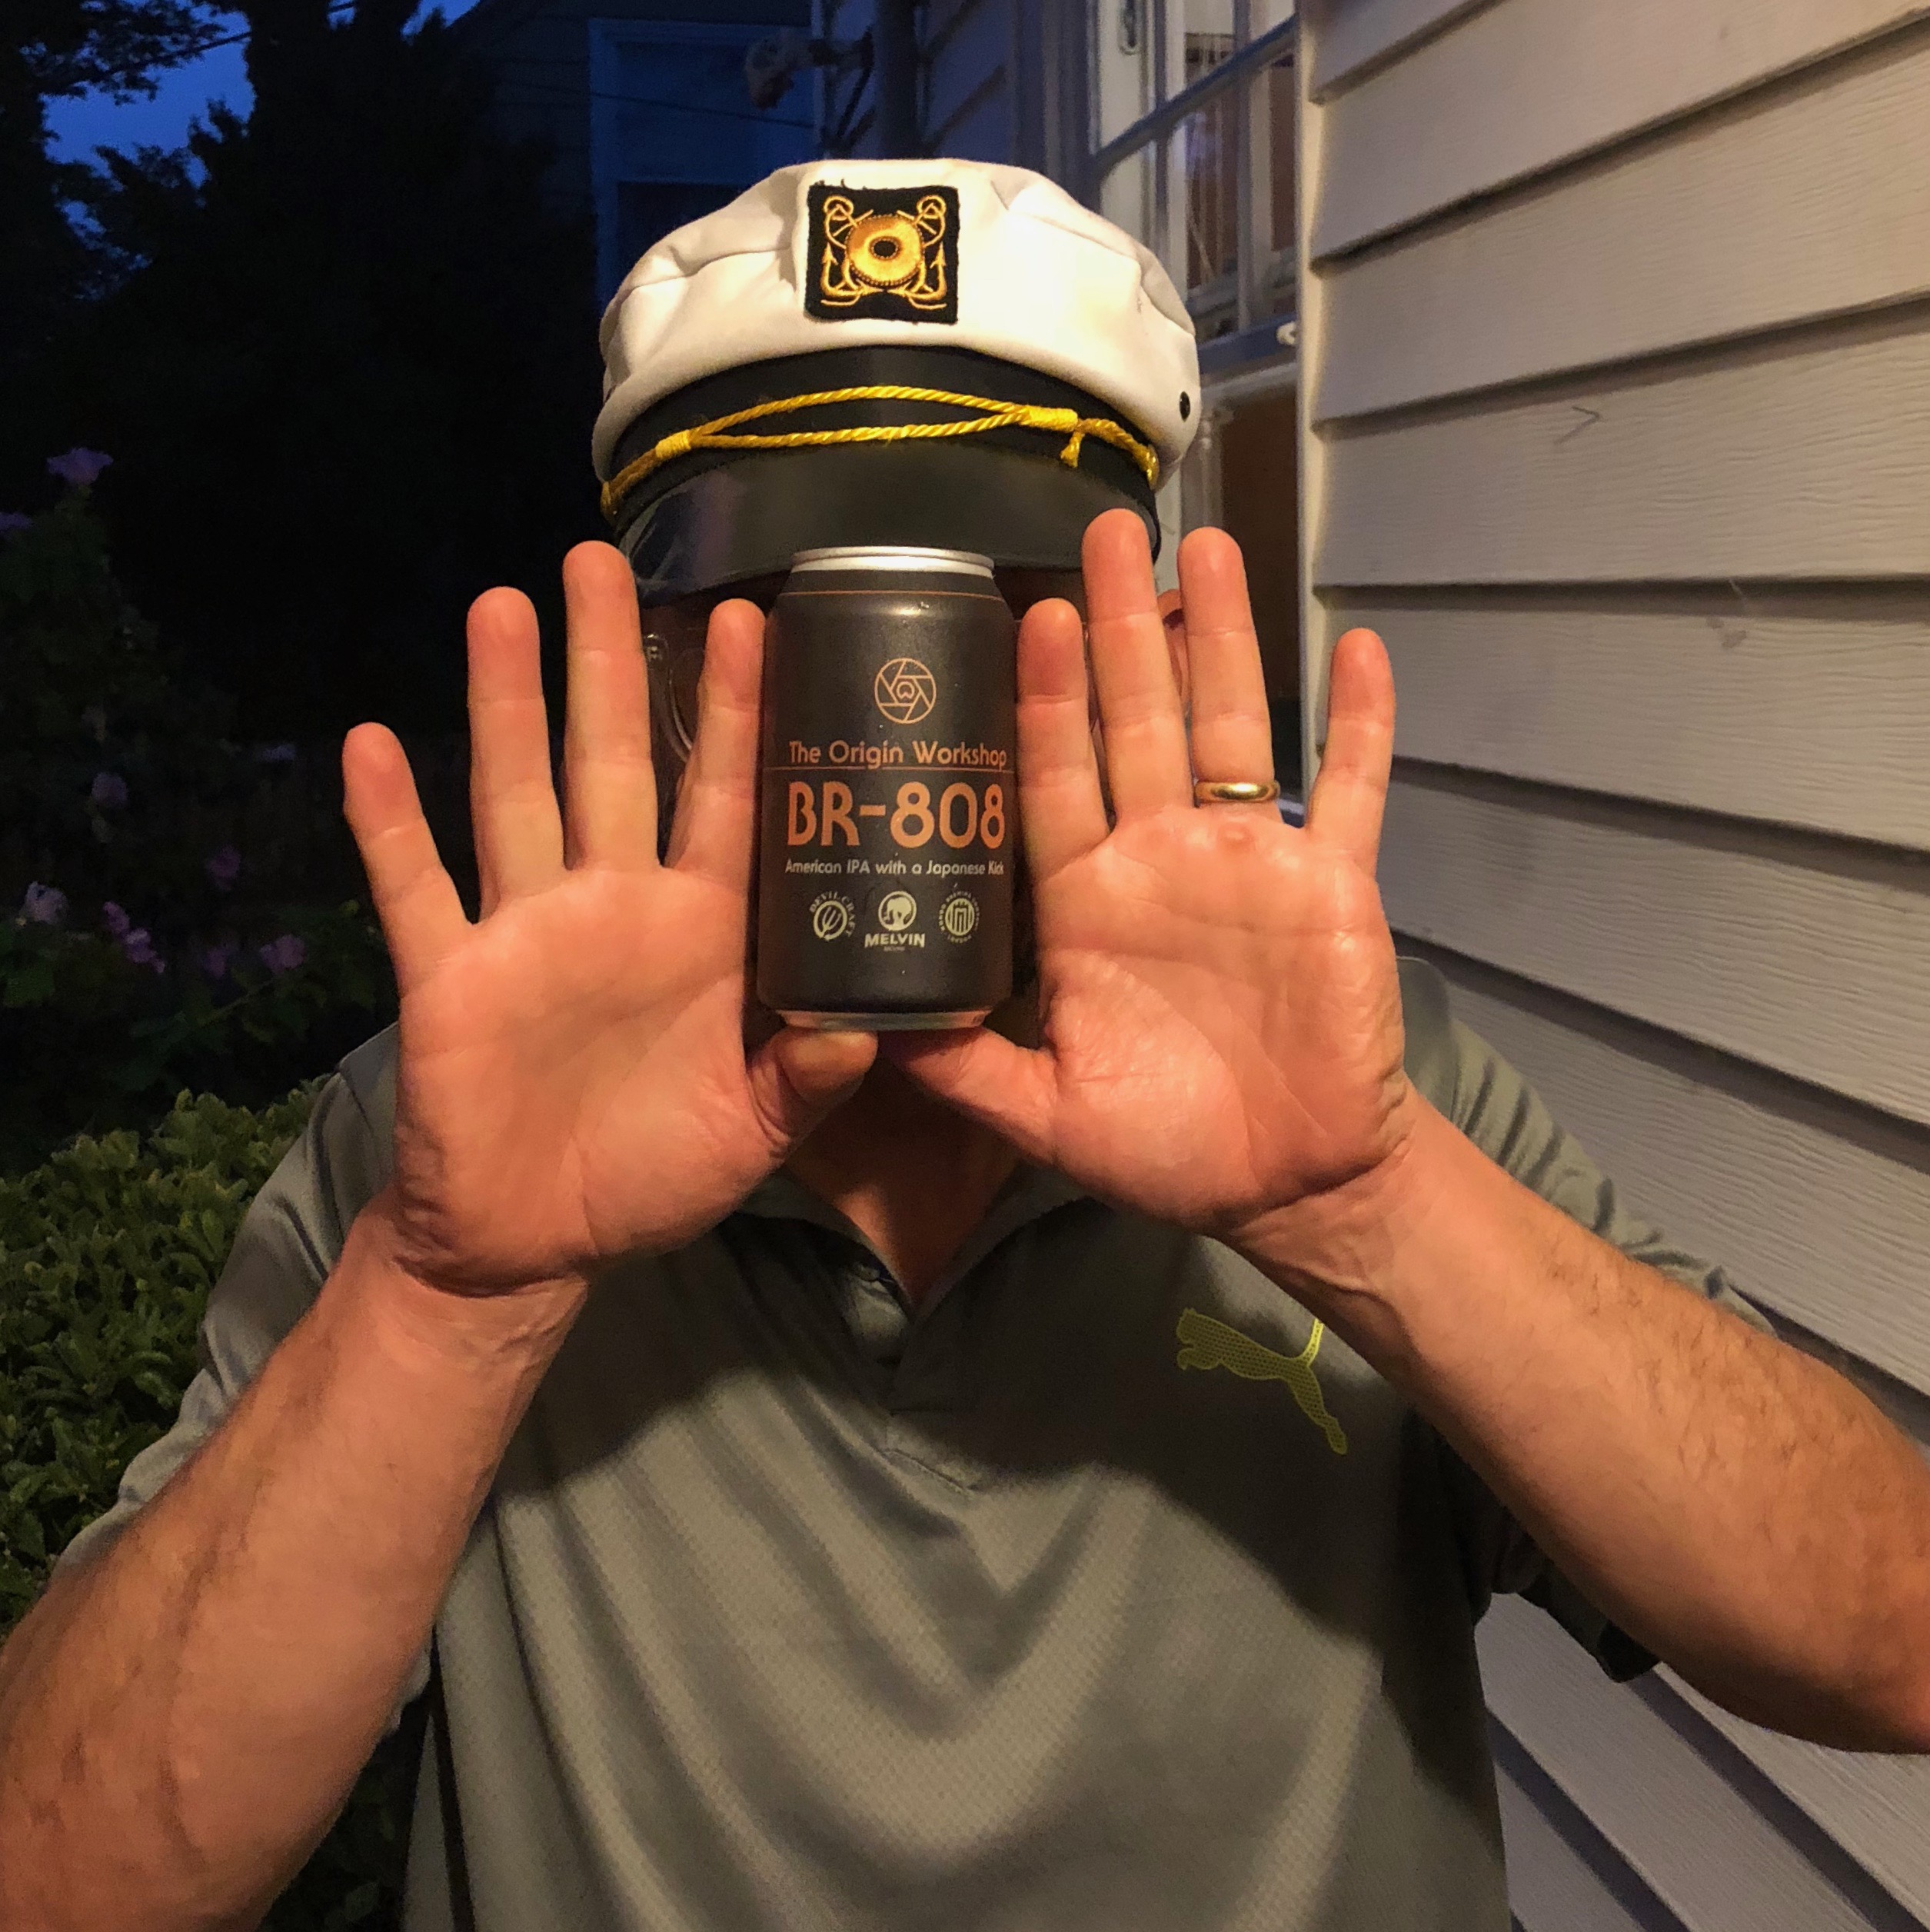 Captain Canal MacWhaler models the new can of Melvin Brewing's BR-808 American IPA.